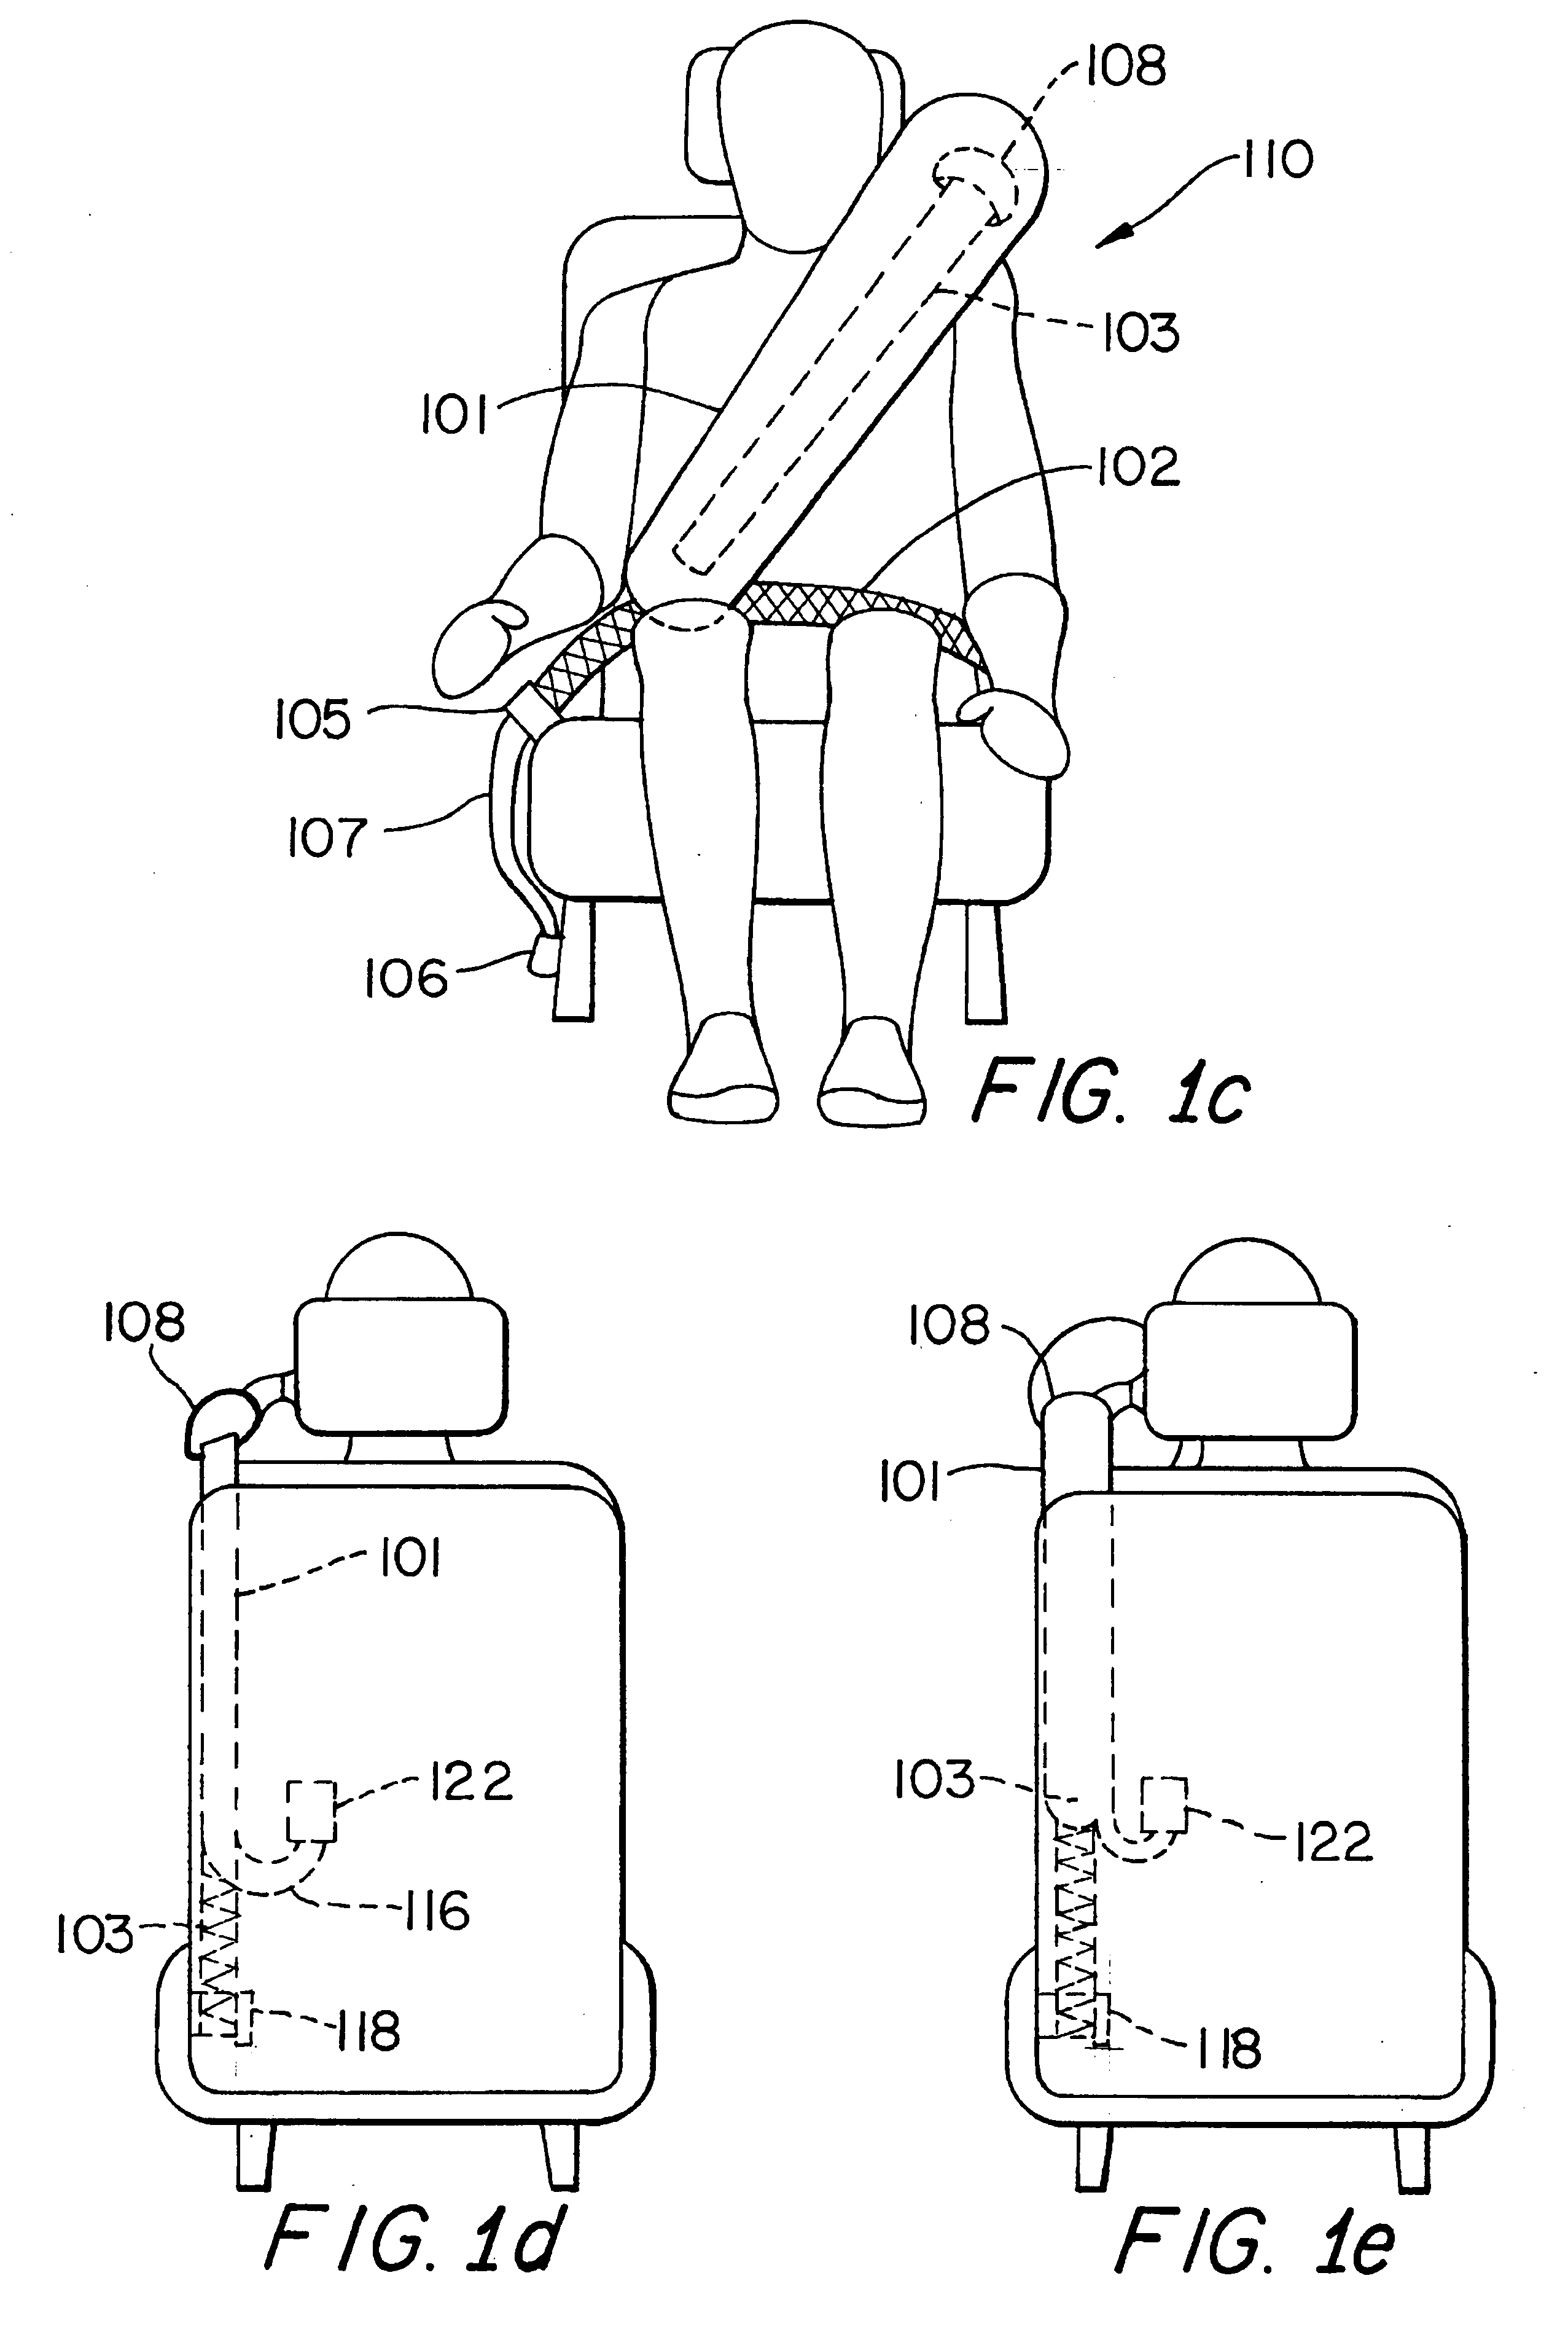 Inflatable tubular torso restraint system with pivoting upper anchor point attachment